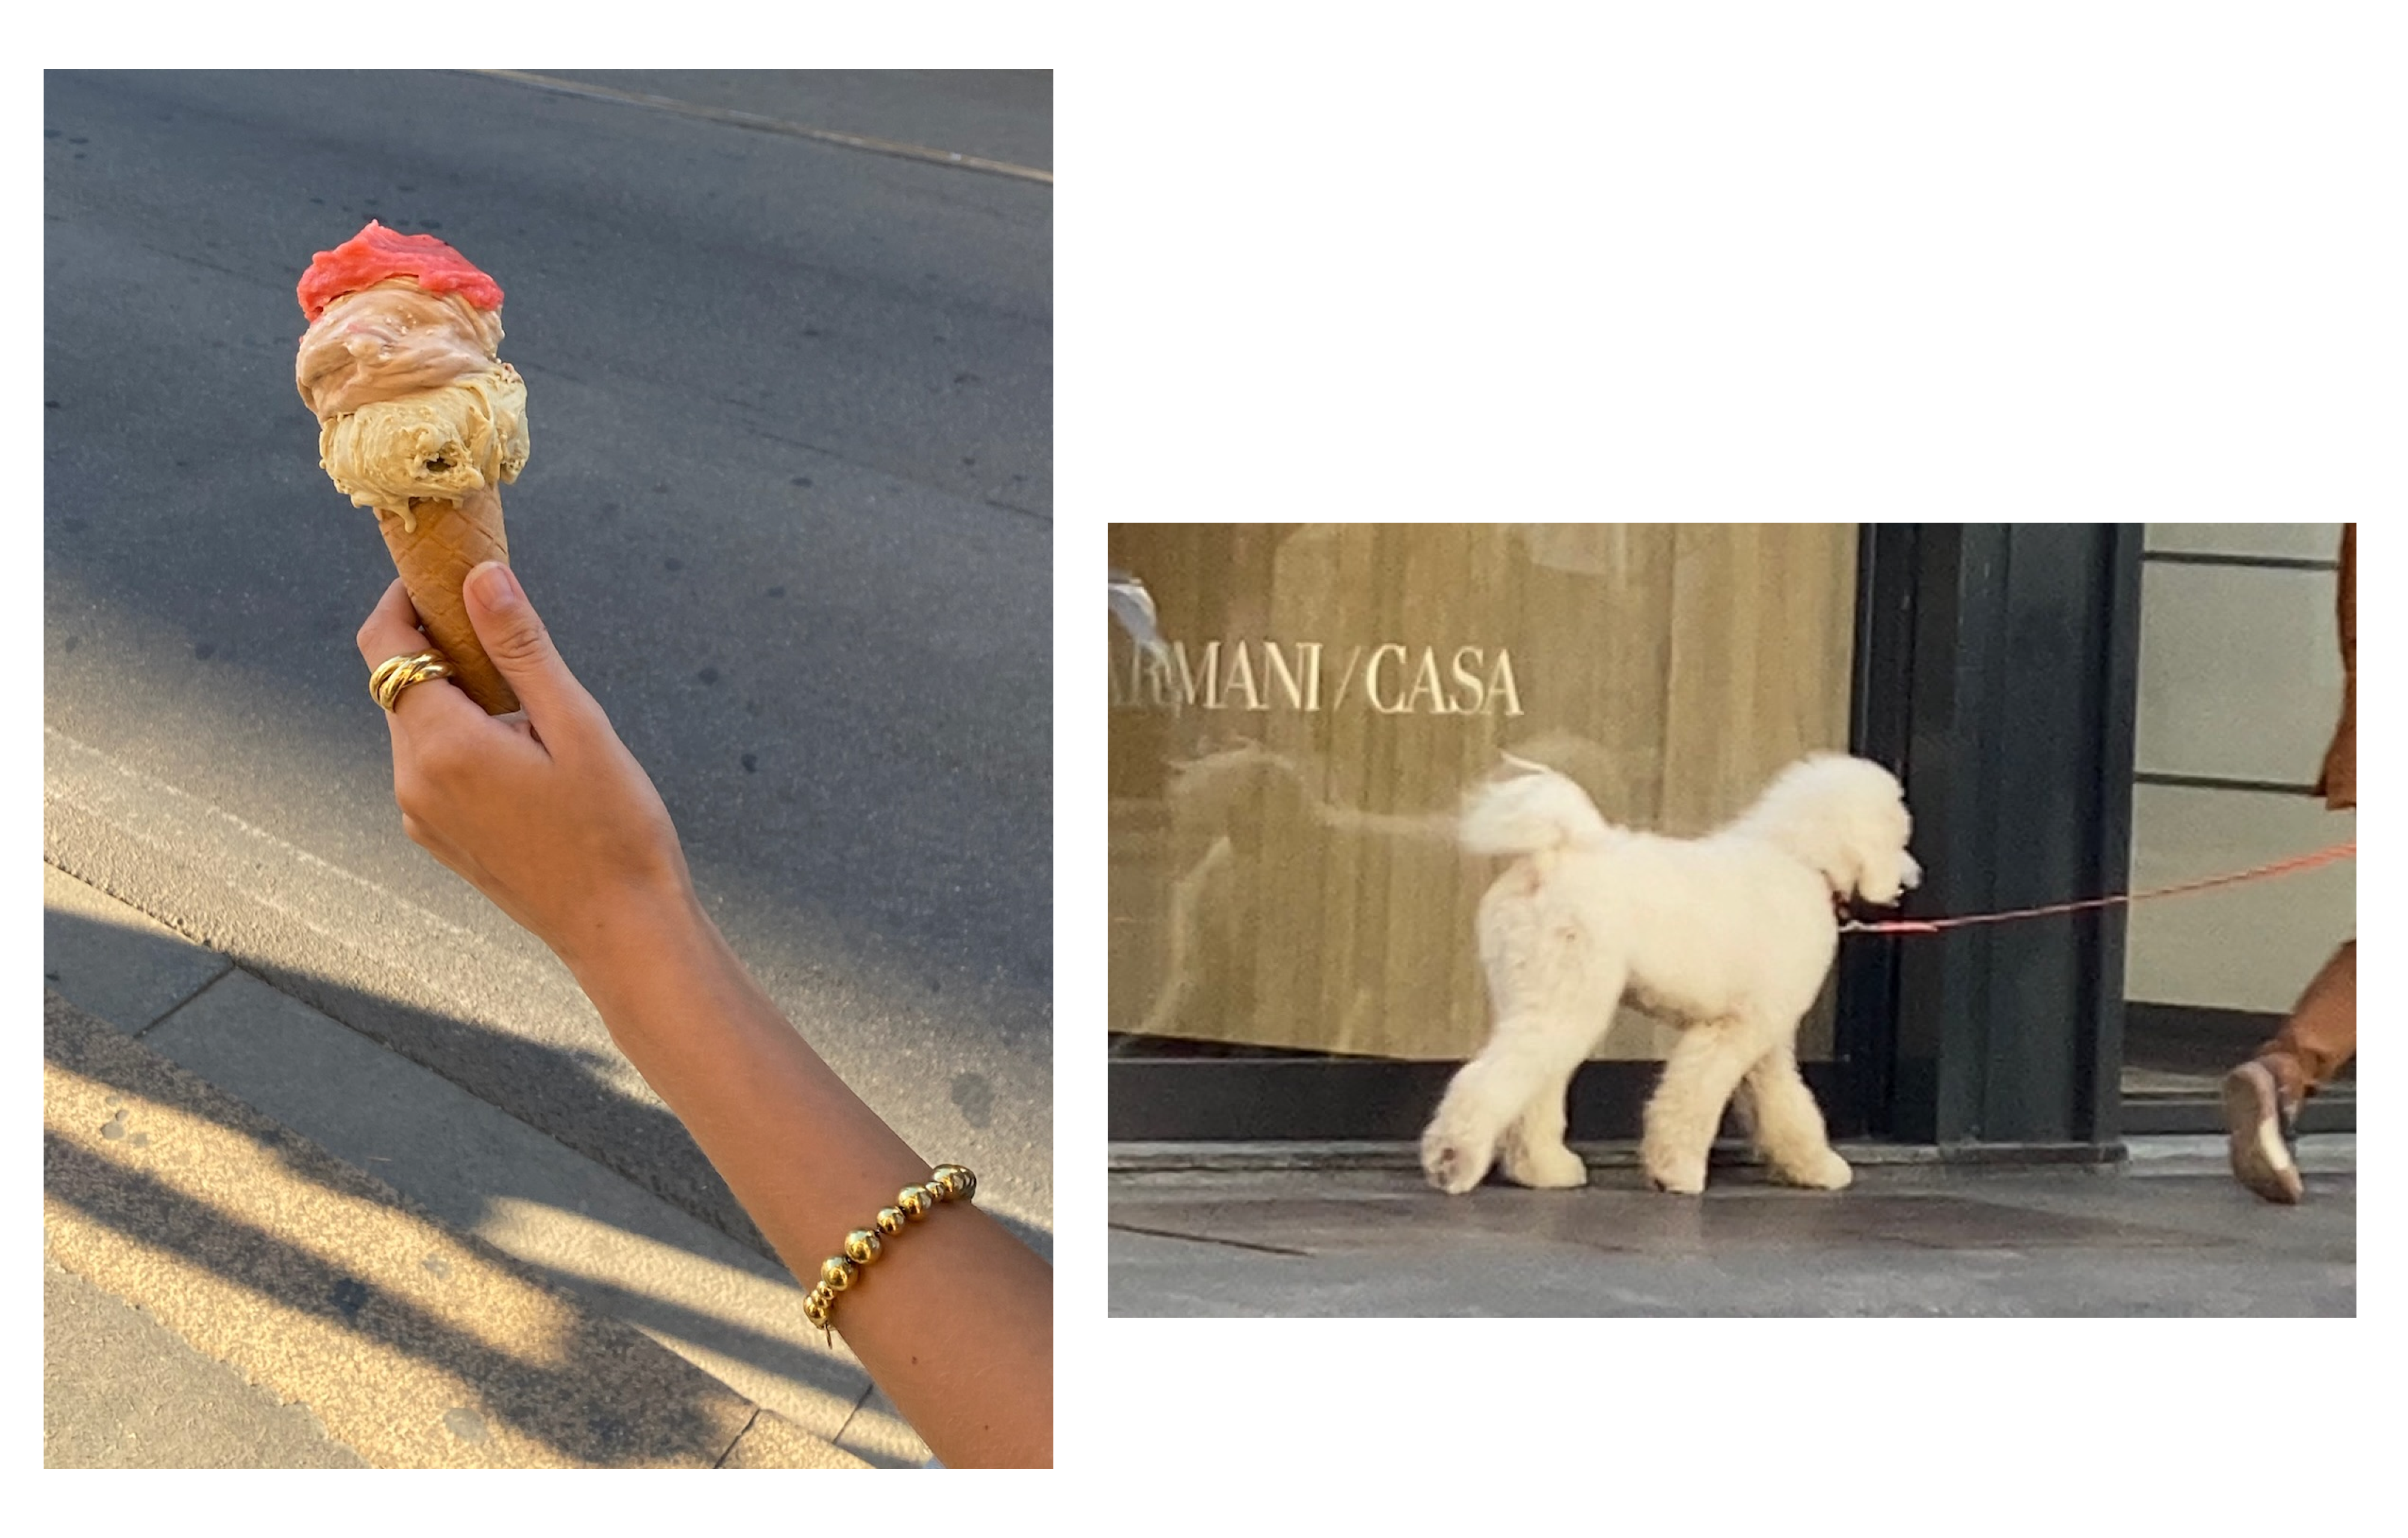 Always gelato when in italy. Accompanied here by the Sofie Ring and Elly Bracelet in gold